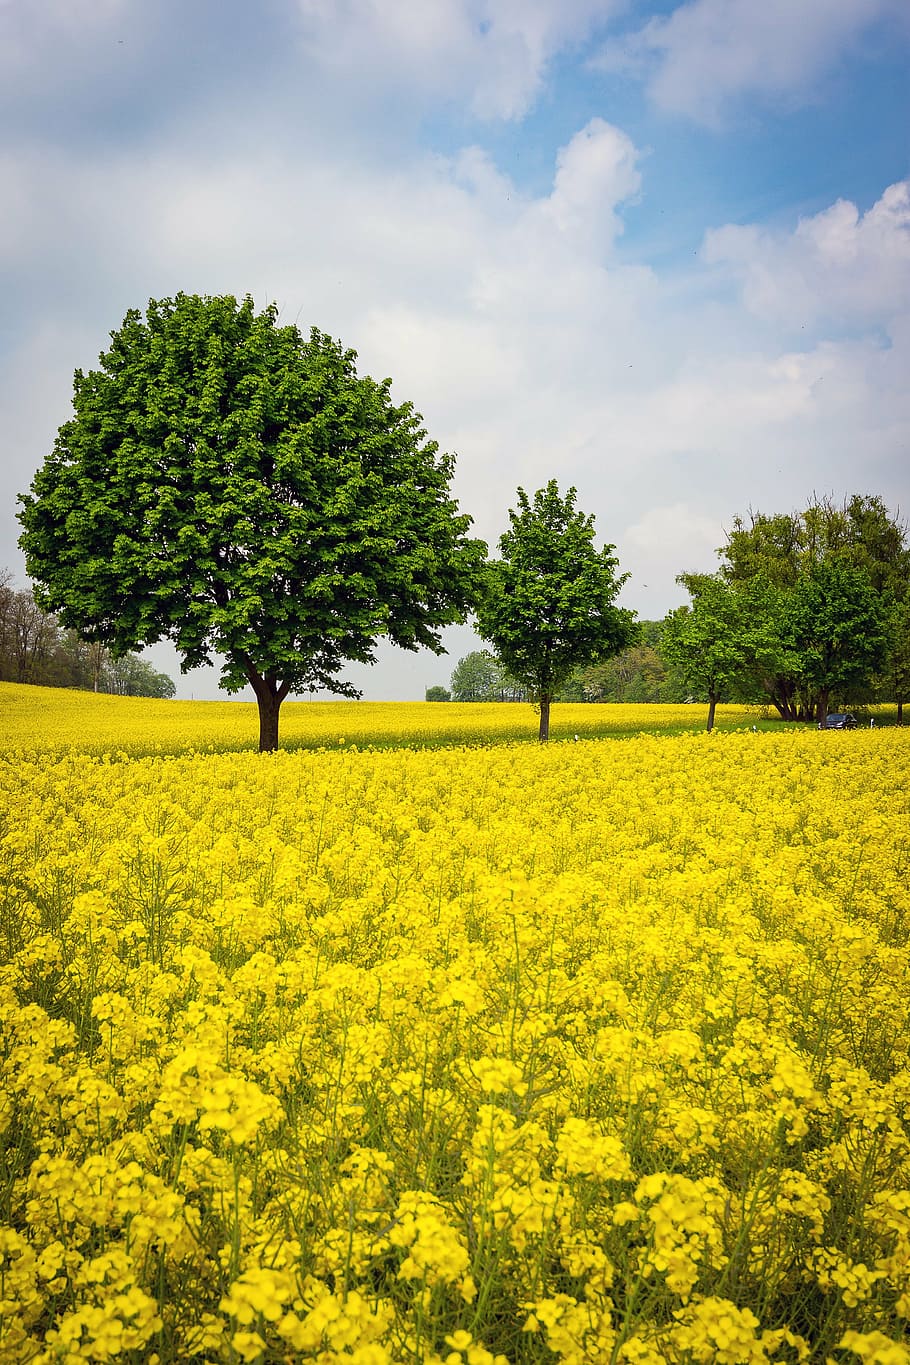 oilseed rape, rape blossom, field of rapeseeds, landscape, agriculture, yellow, nature, blossom, bloom, plant